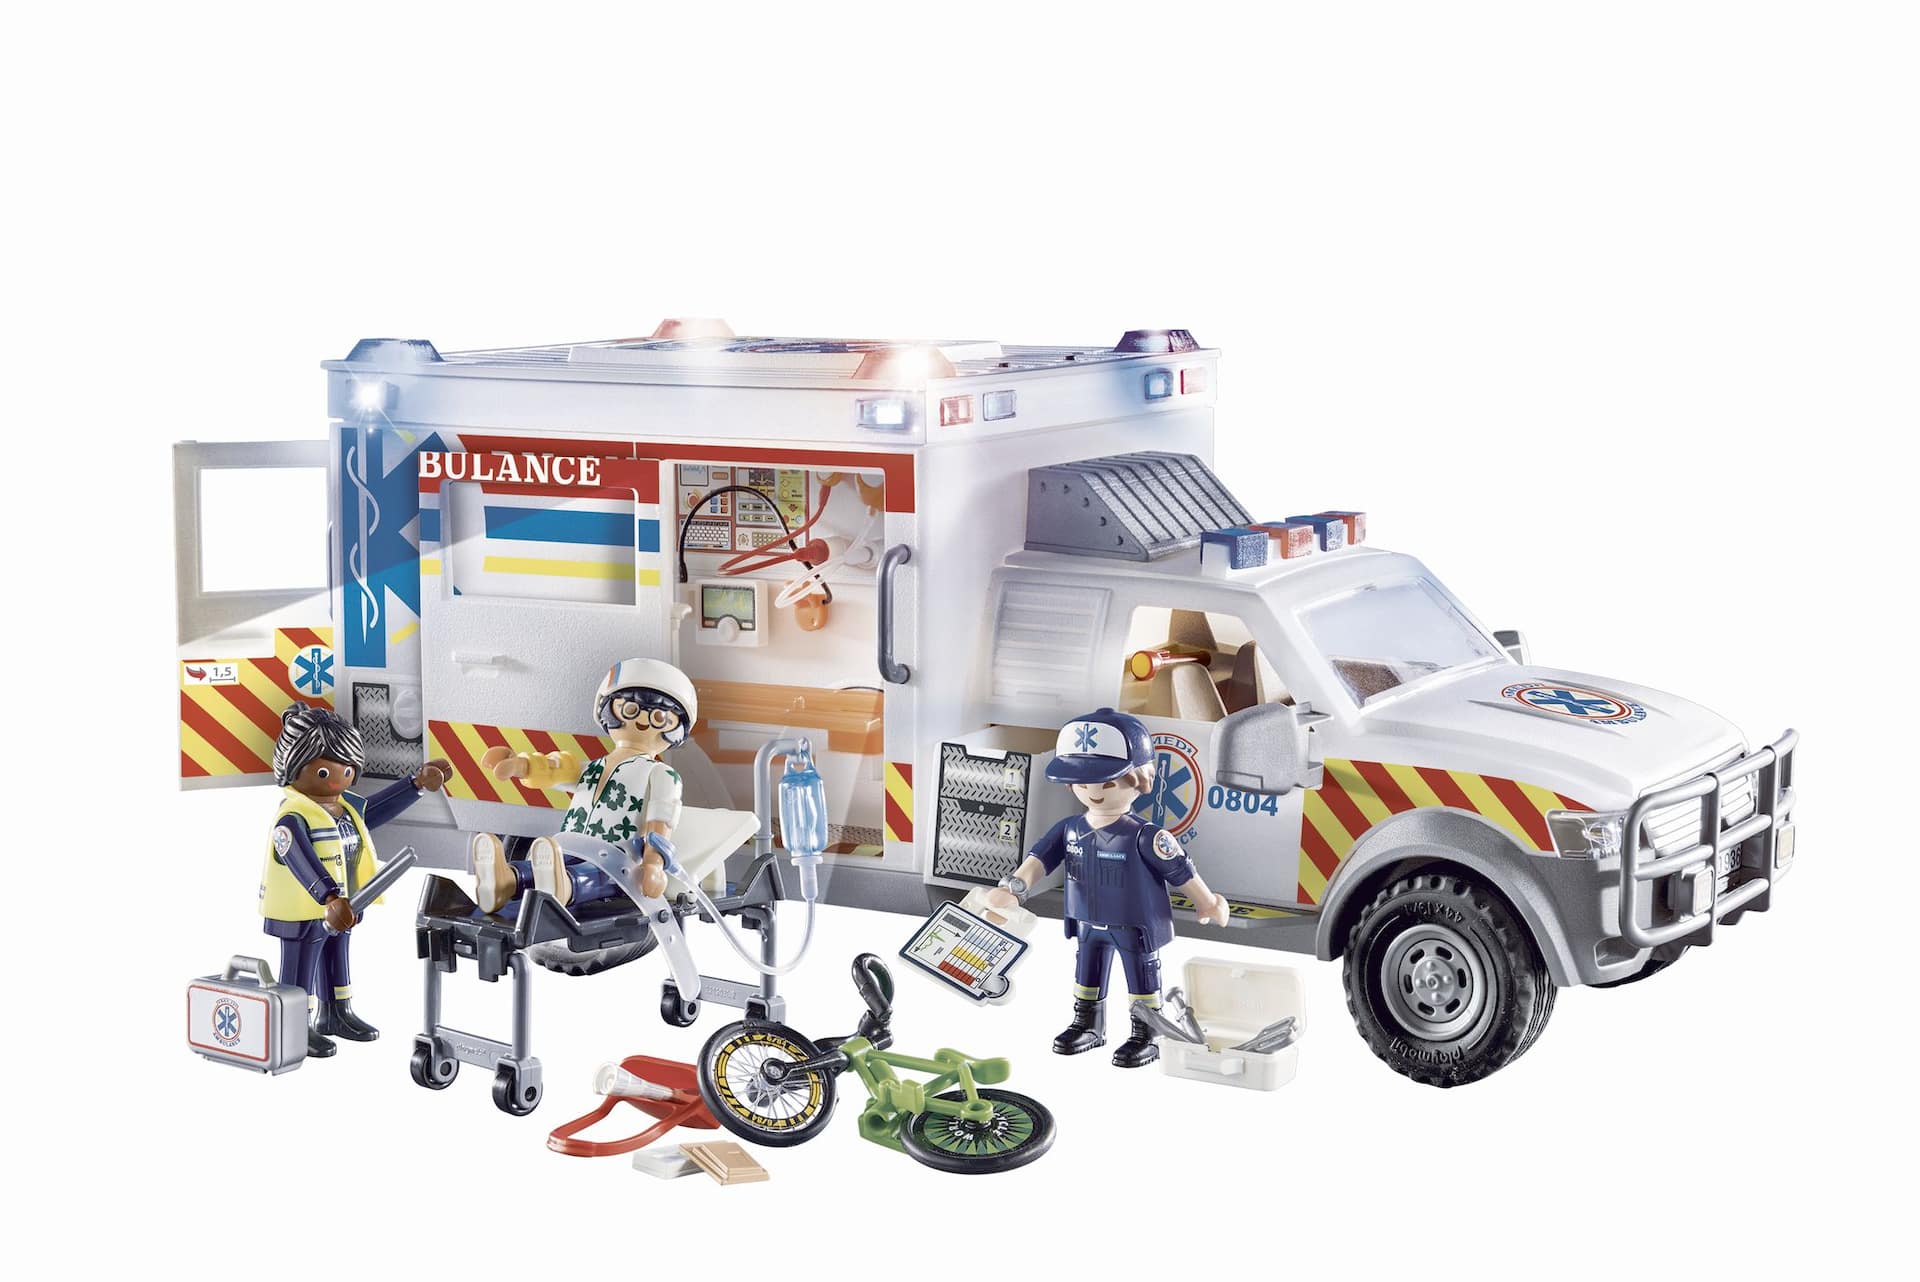 Playmobil City Ambulance with Lights and Sound - Imagination Toys